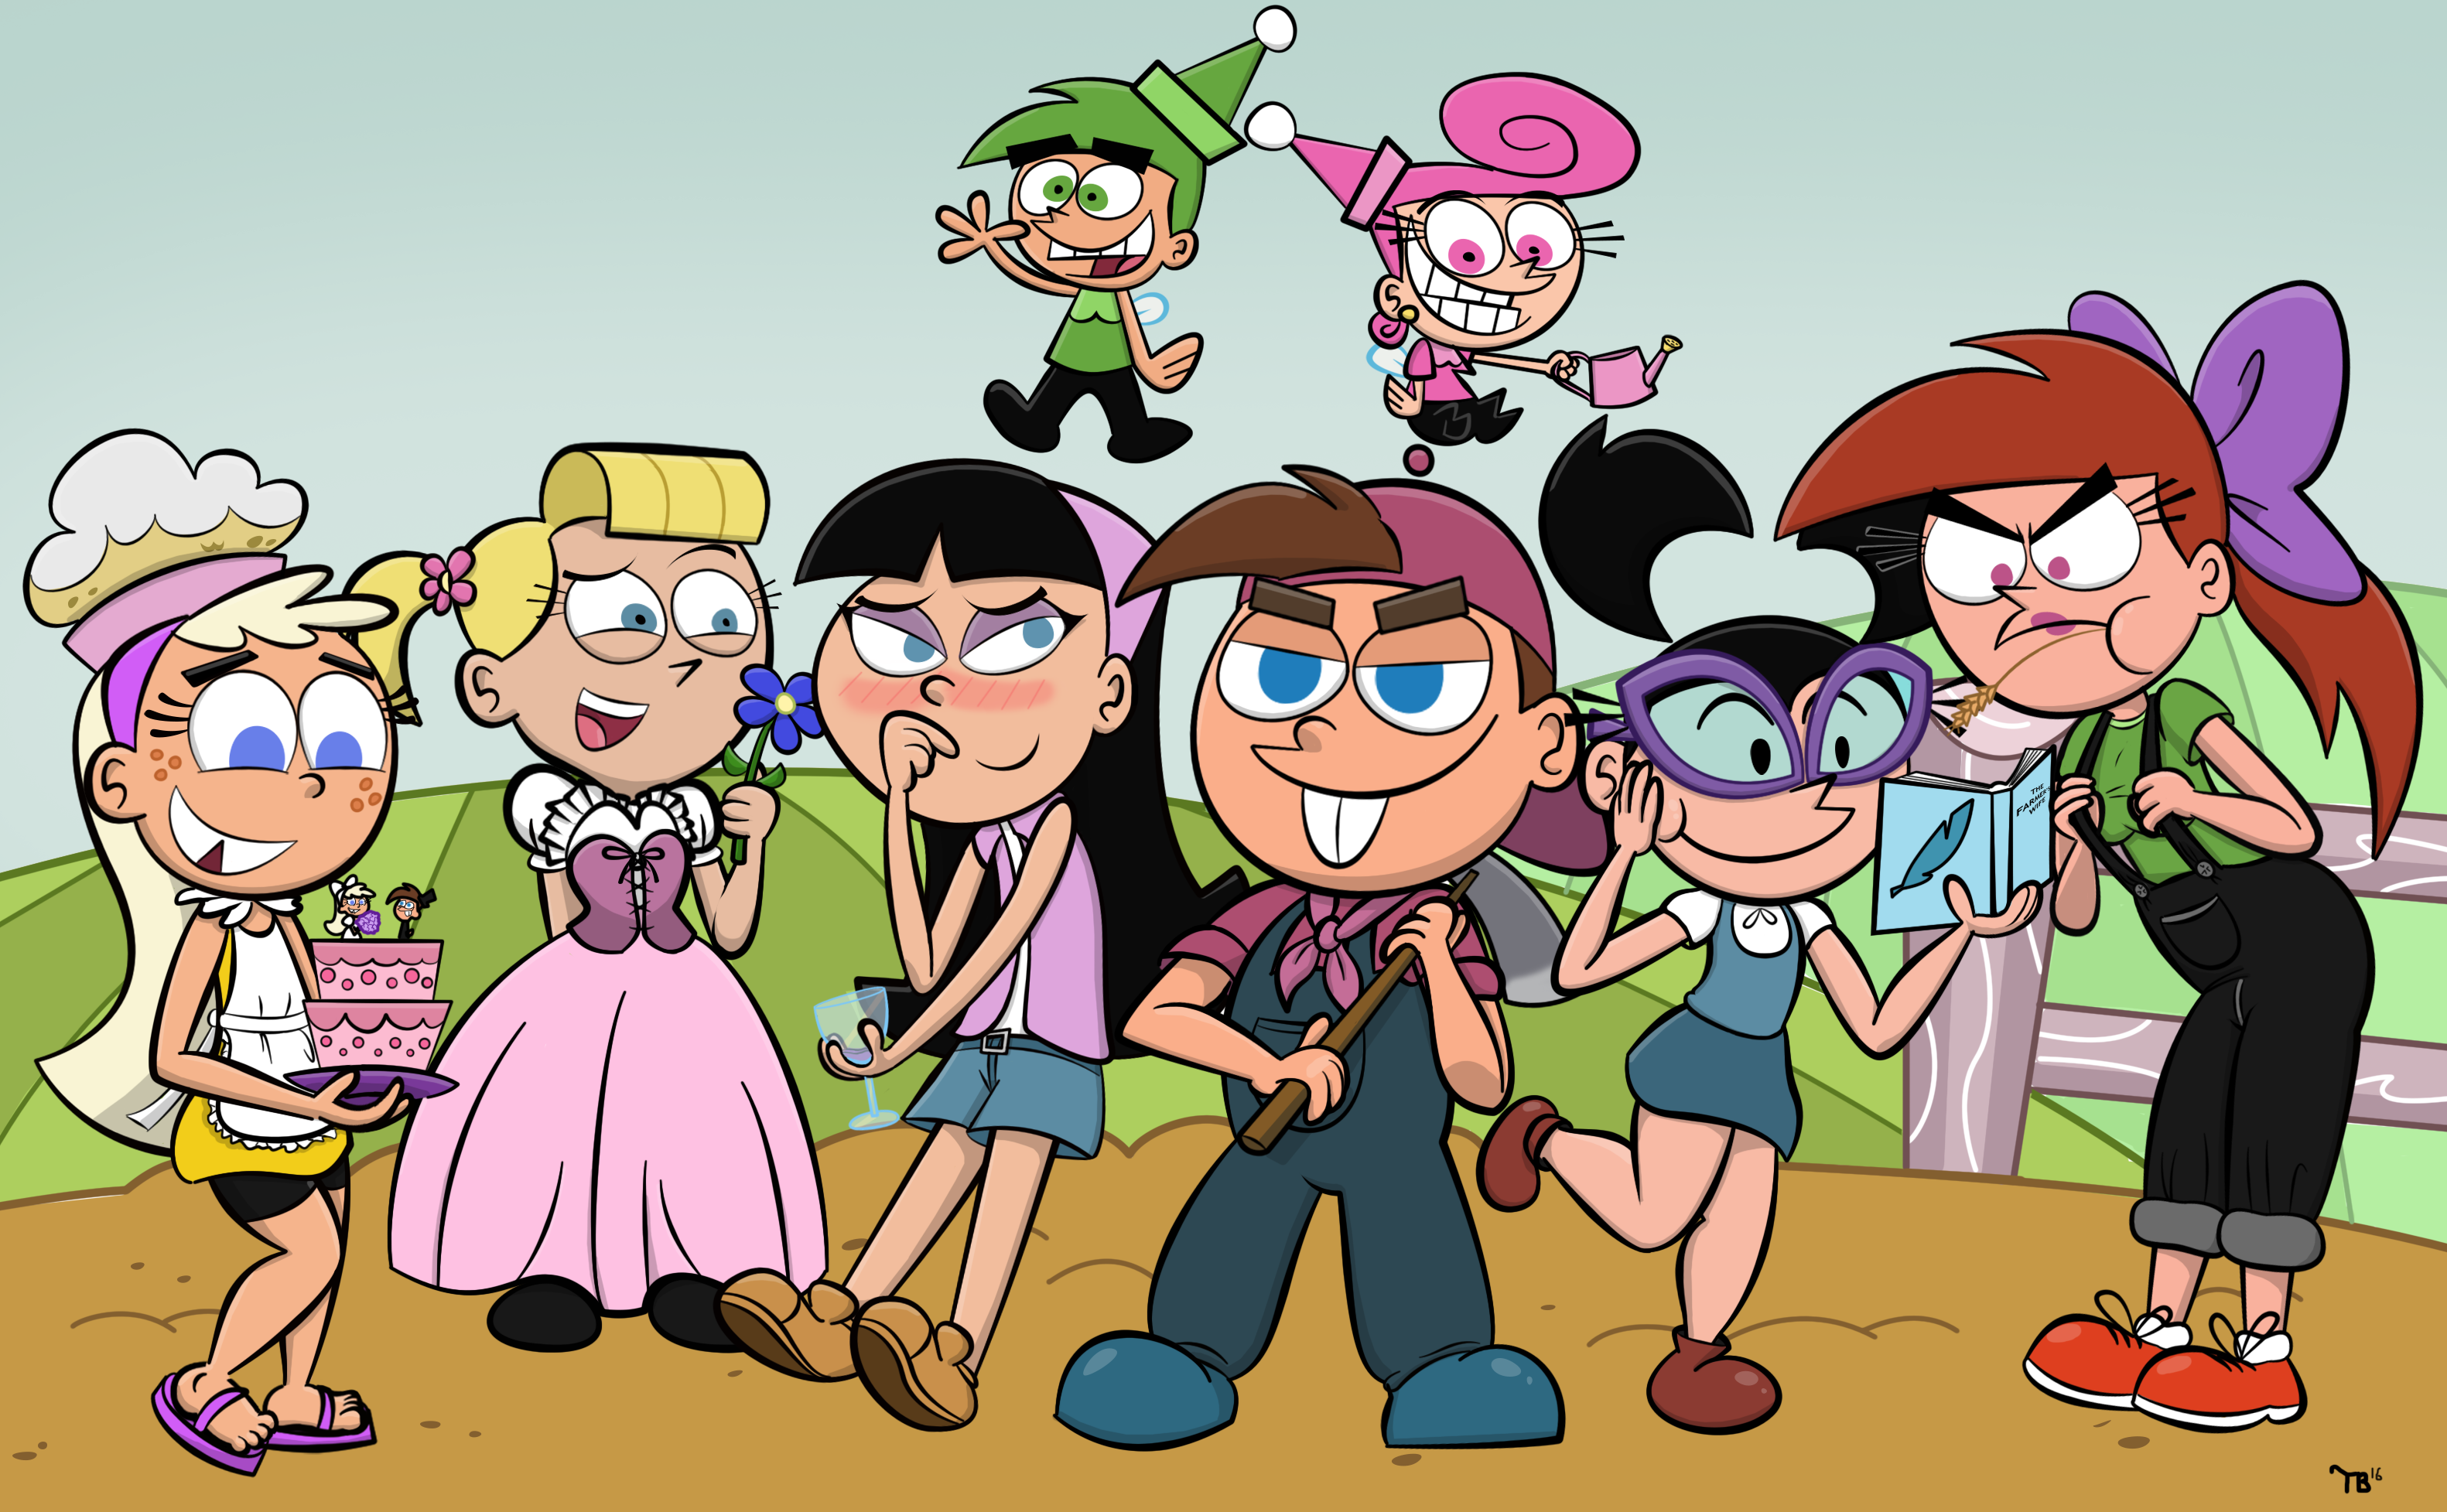 harvest_moon_fairly_oddparents_crossover_by_toonbabifier_da34oxi.png.